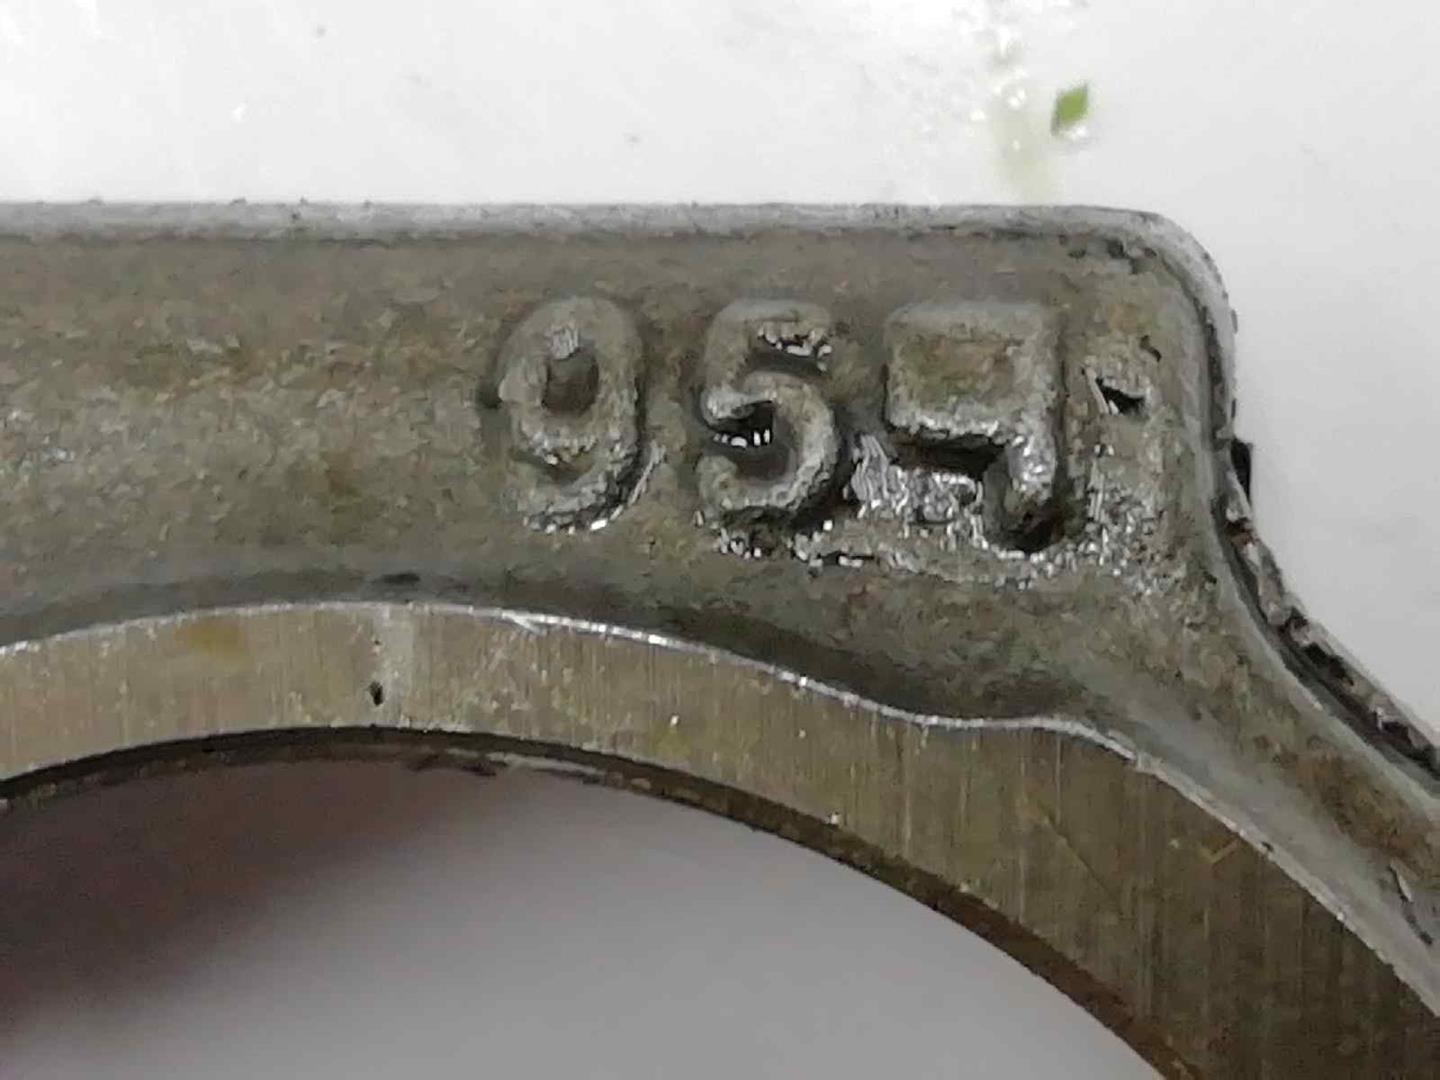 PEUGEOT 308 T9 (2013-2021) Connecting Rod 1610806380, 1610806380 19752976